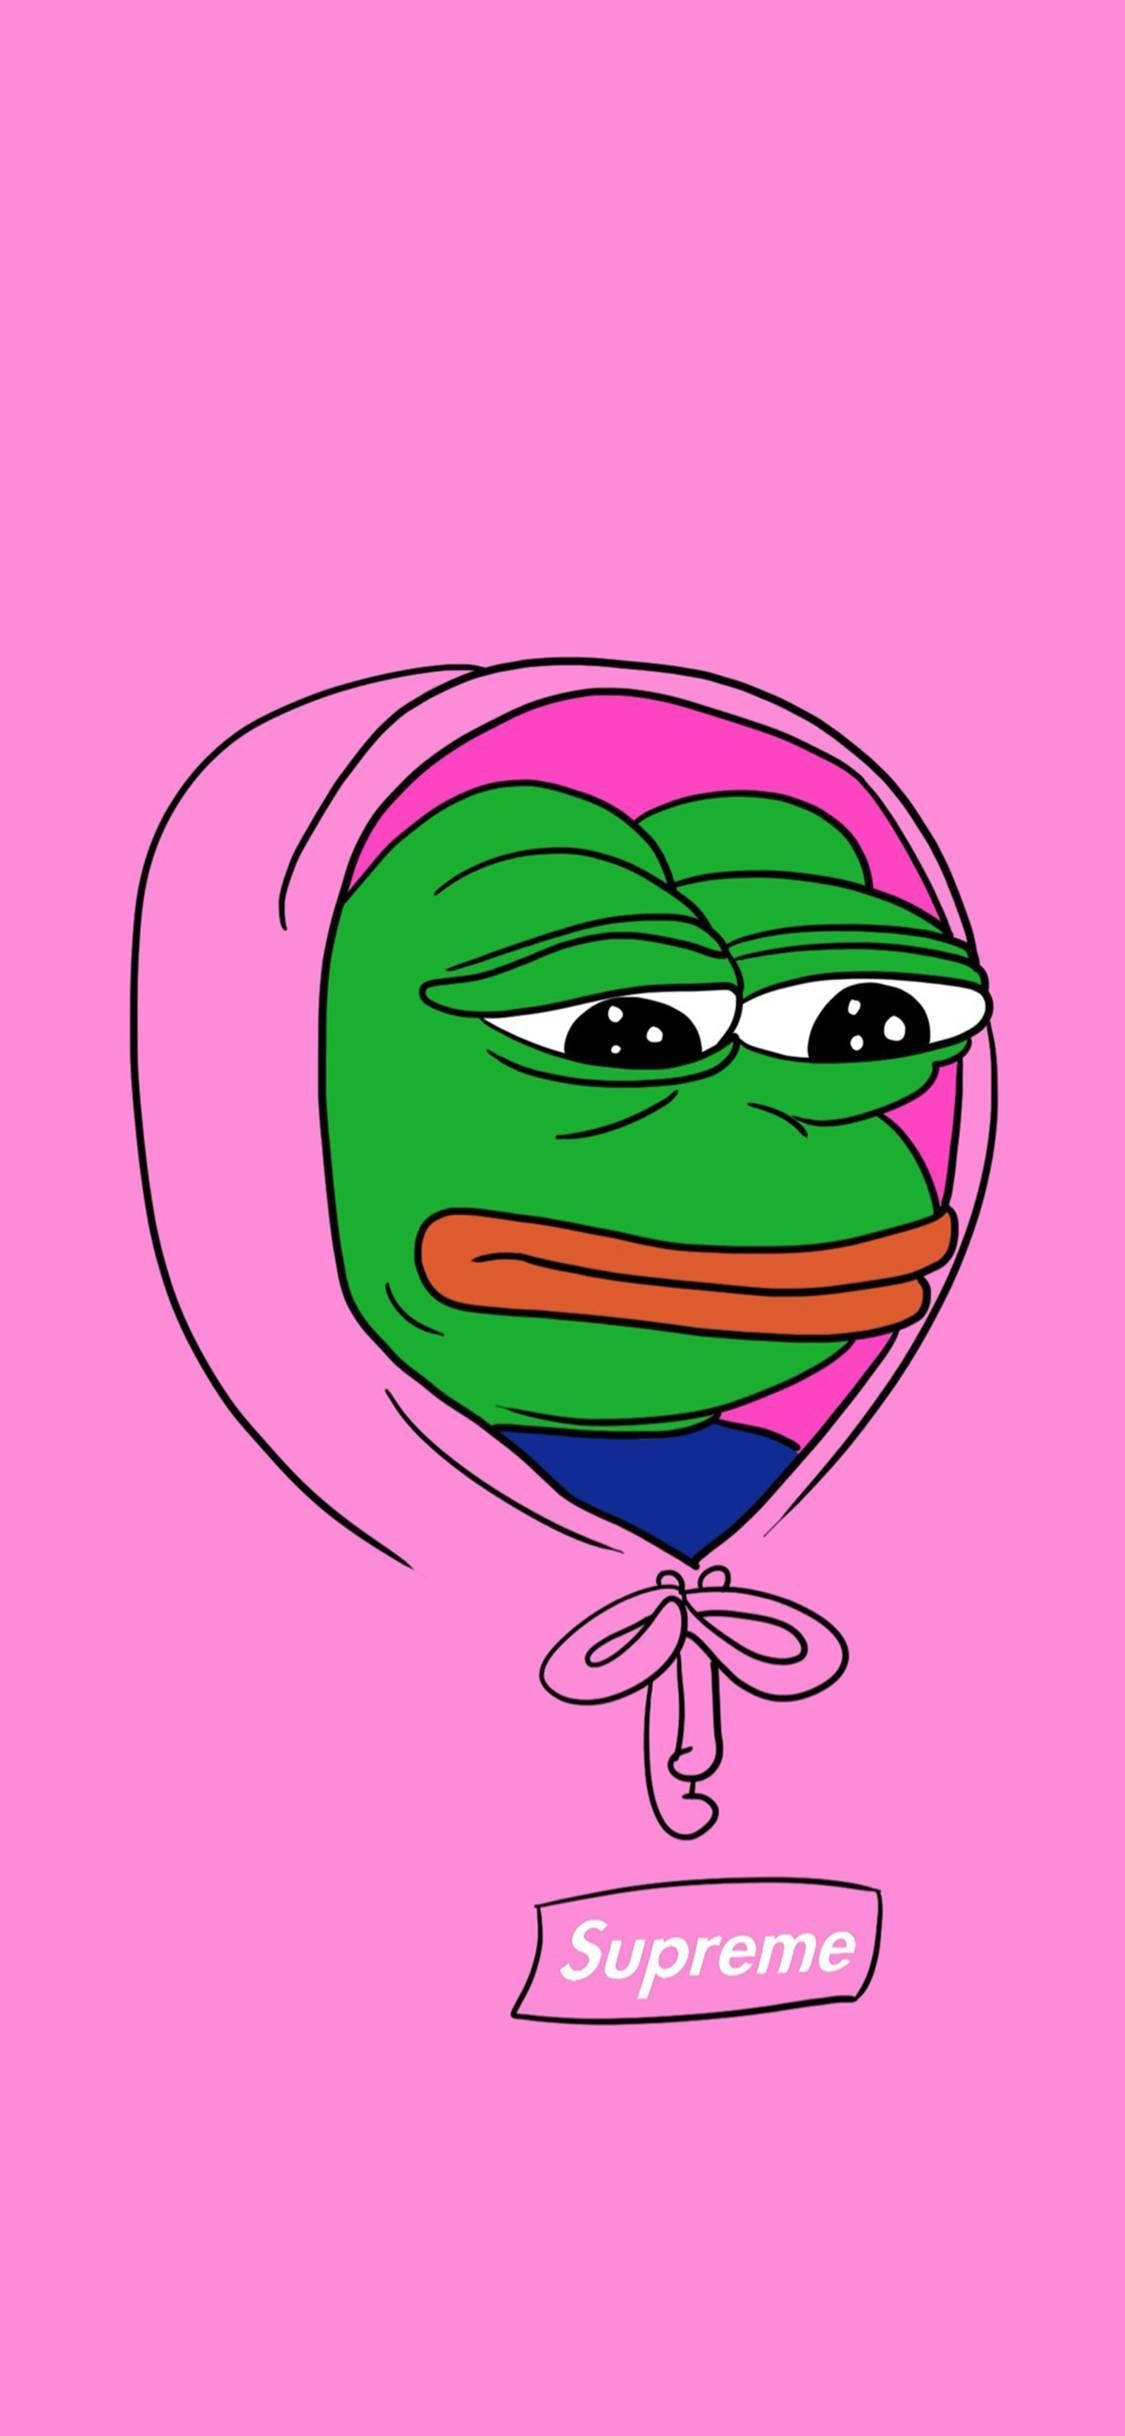 1125x2436 Download Pepe The Frog In Supreme Wallpaper